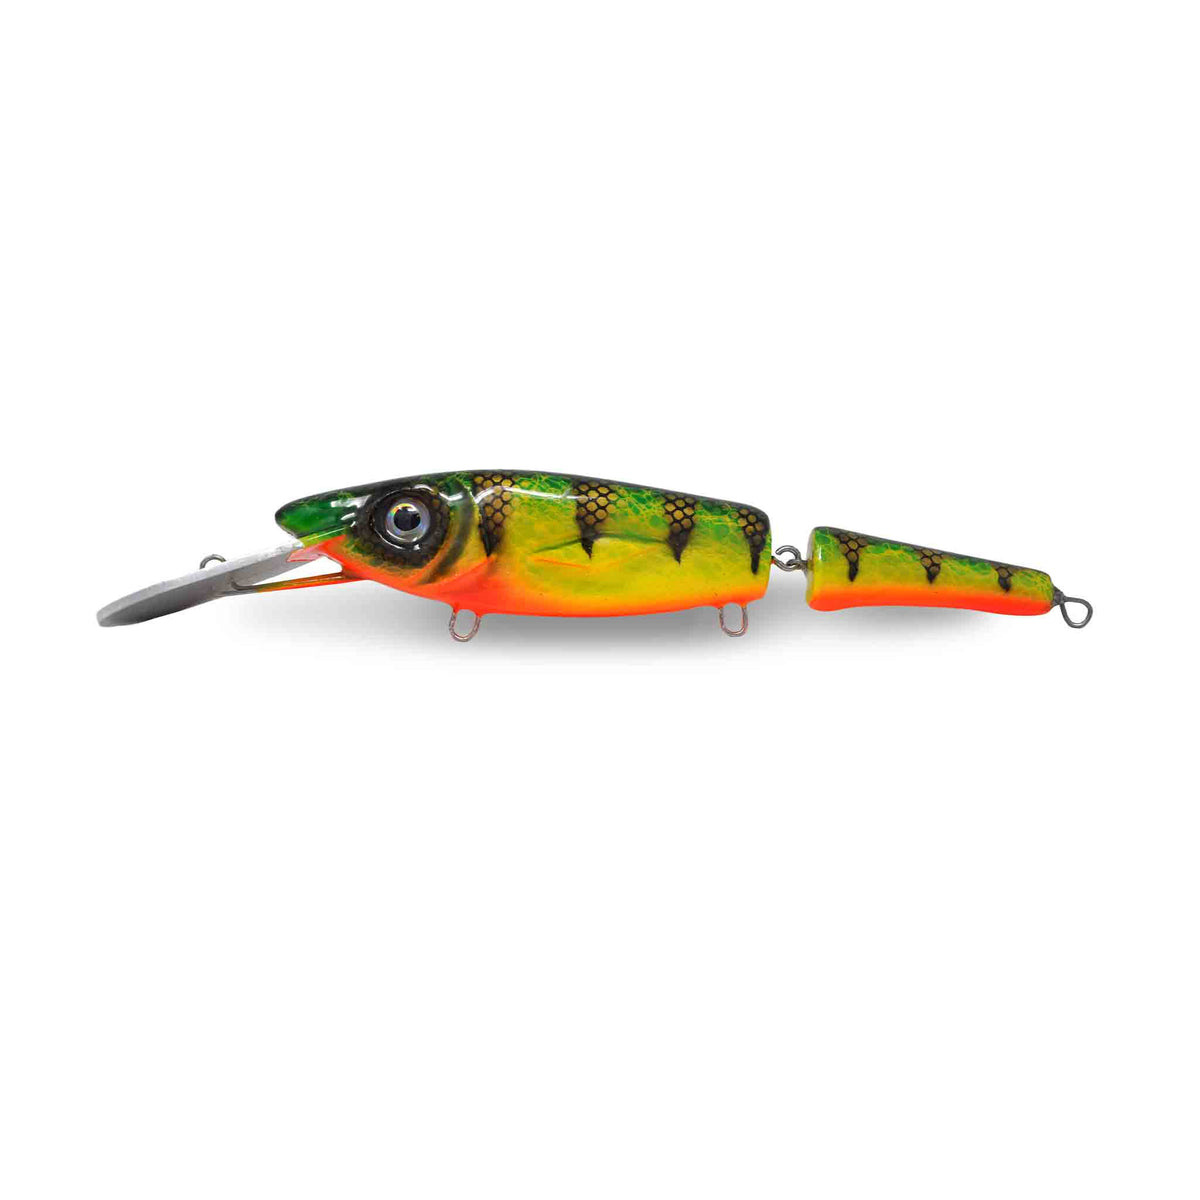 View of Crankbaits Scorpion MadBait Jointed 10'' Crankbait Fire Tiger available at EZOKO Pike and Musky Shop